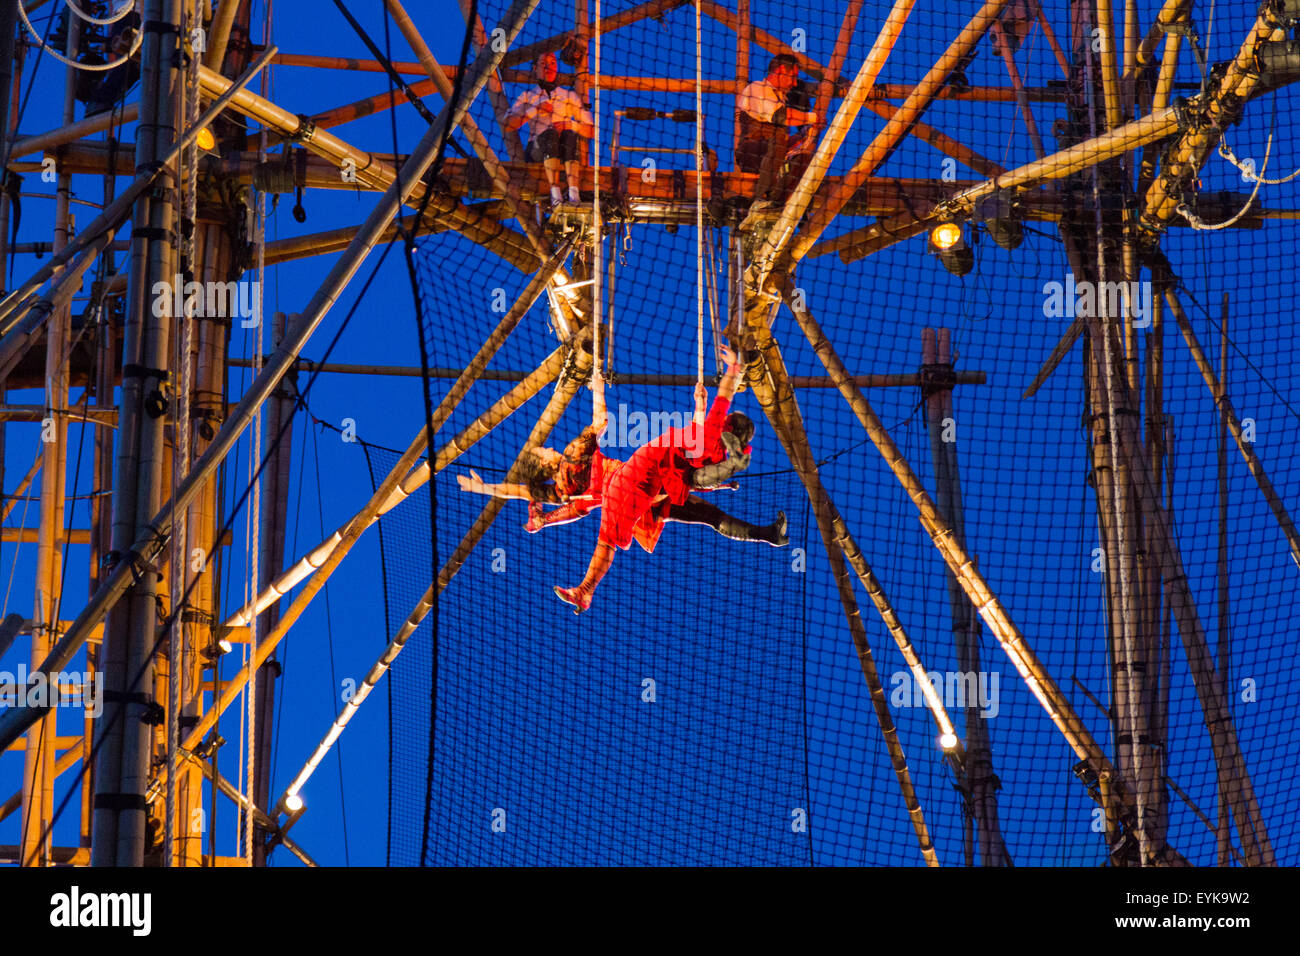 Stockton-on-Tees, UK, Thursday, 30 July, 2015. French circus company CirkVOST perform BoO, an open air aerial trapeze show, on a 15-metre high structure of 368 assembled bamboo poles. Credit:  Andrew Nicholson/Alamy Live News Stock Photo